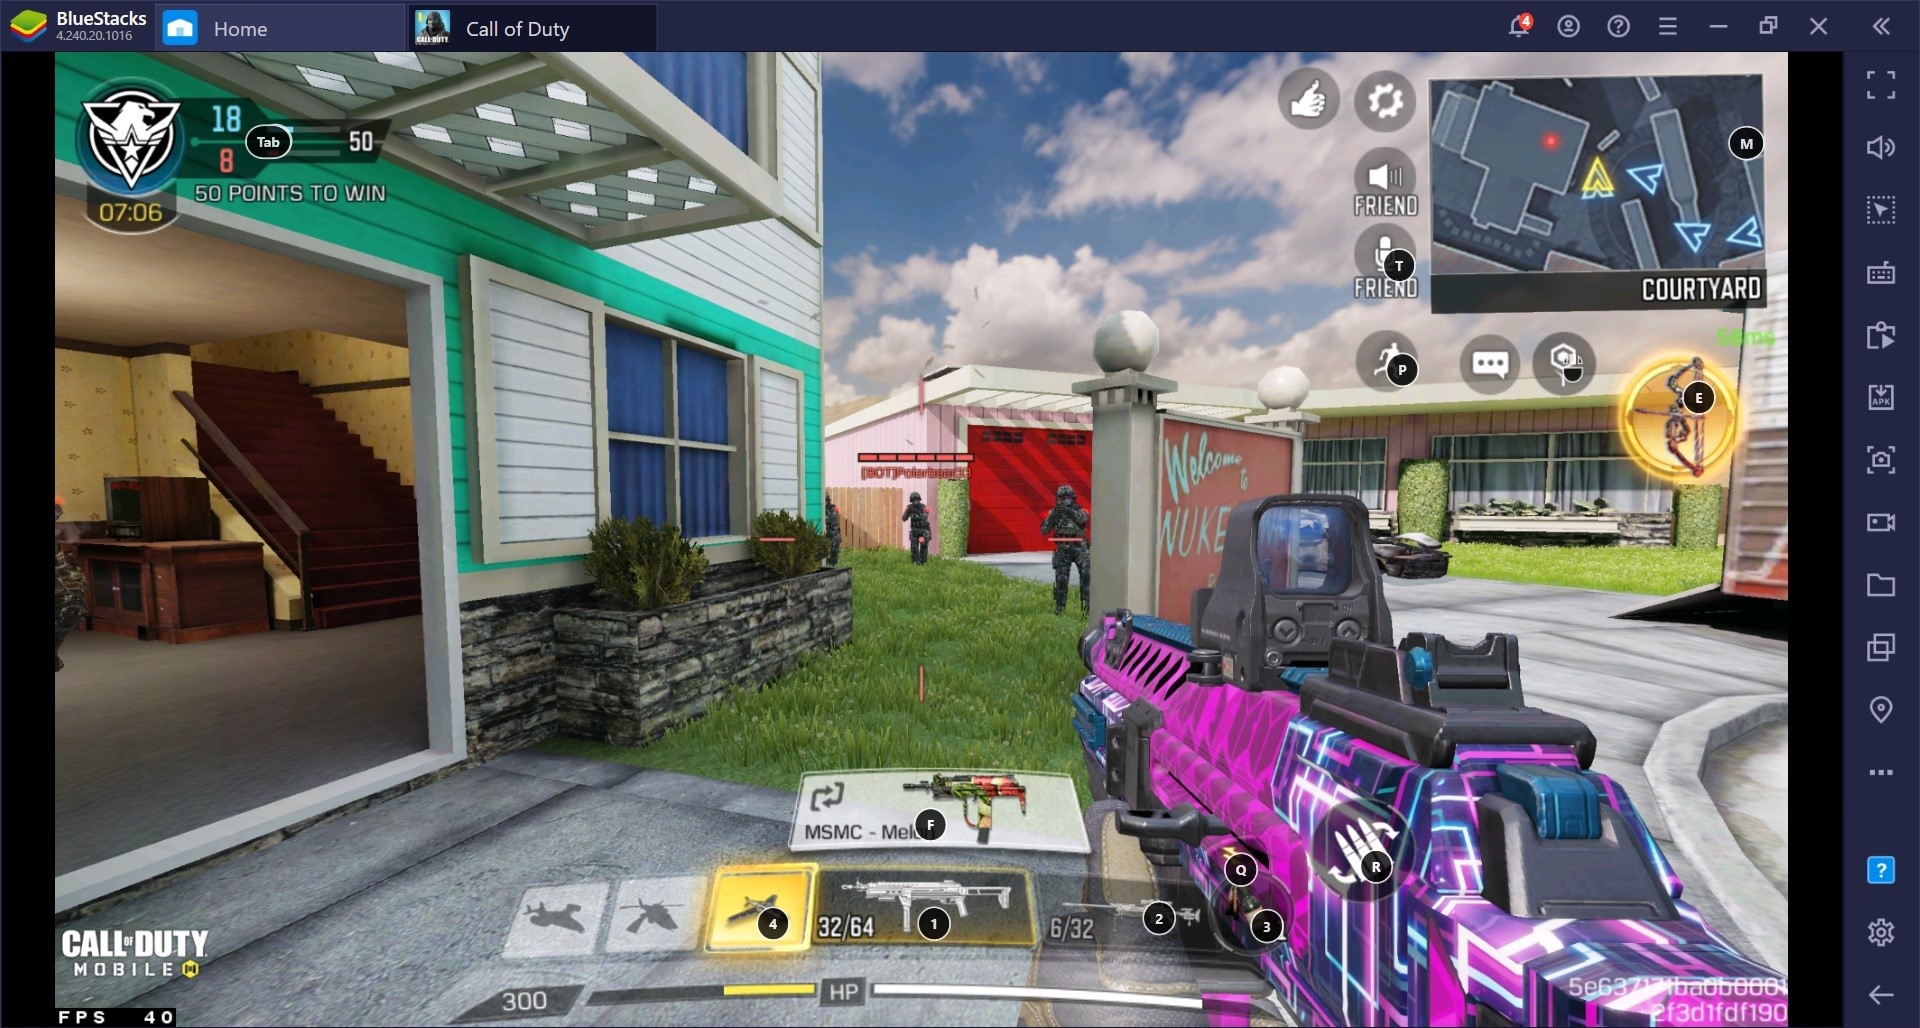 Call of Duty: Mobile Movement Guide, Learn How Peeking can Change the Game